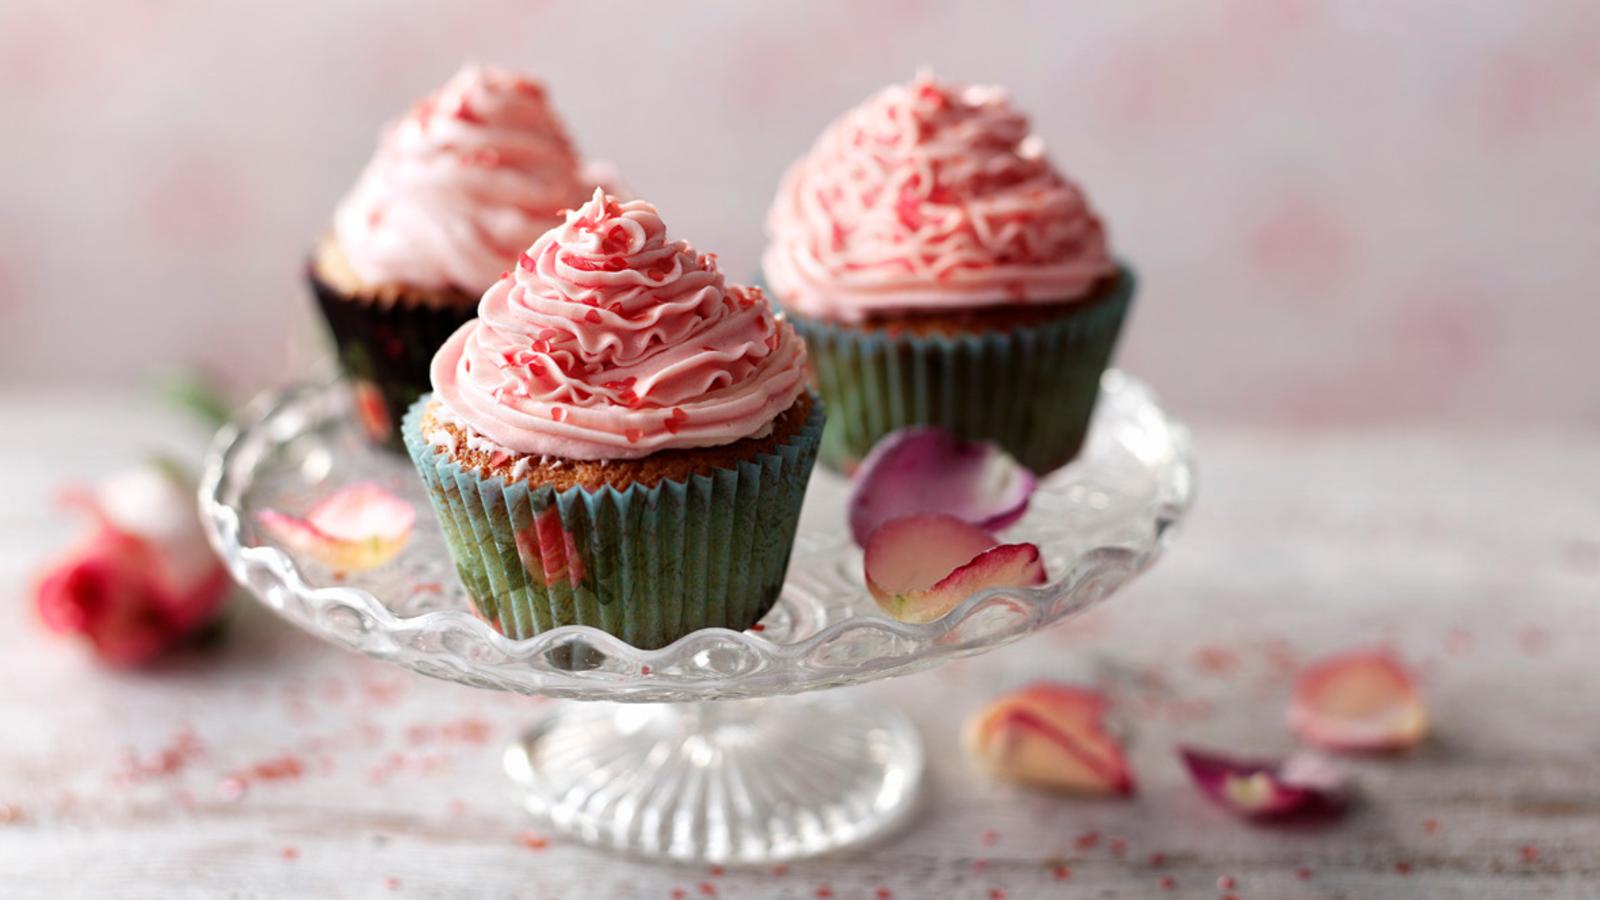 Pretty pink cupcakes for Valentine's day.